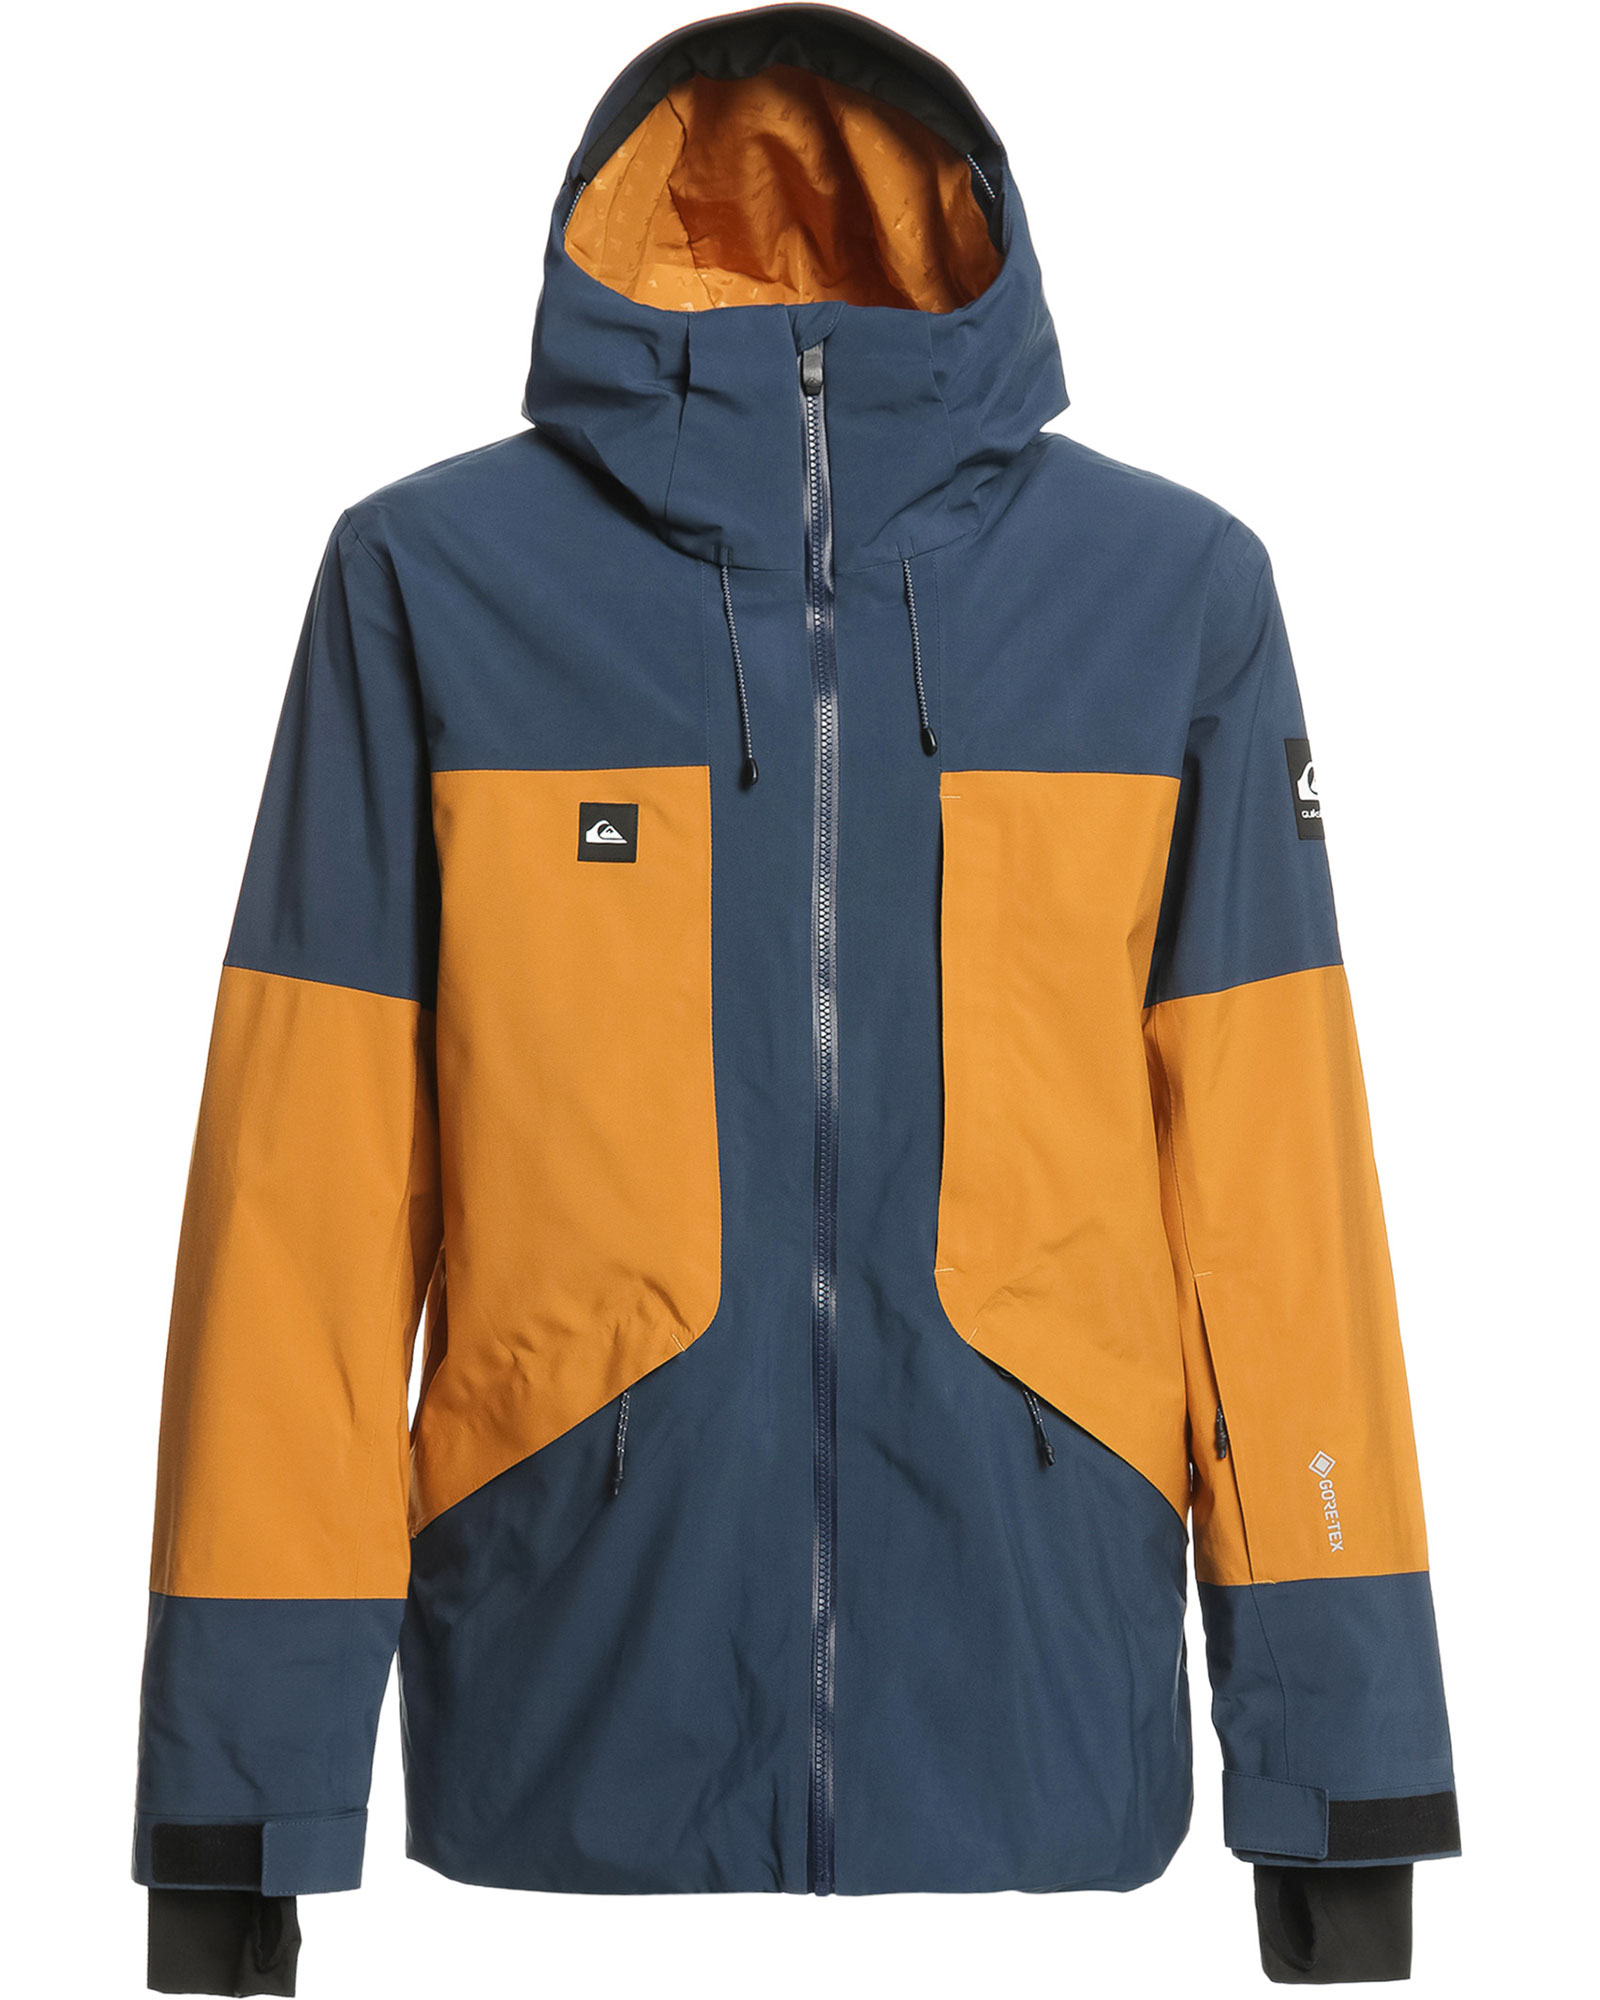 Quiksilver Forever Stretch GORE TEX Insulated Men’s Jacket - Insignia Blue S